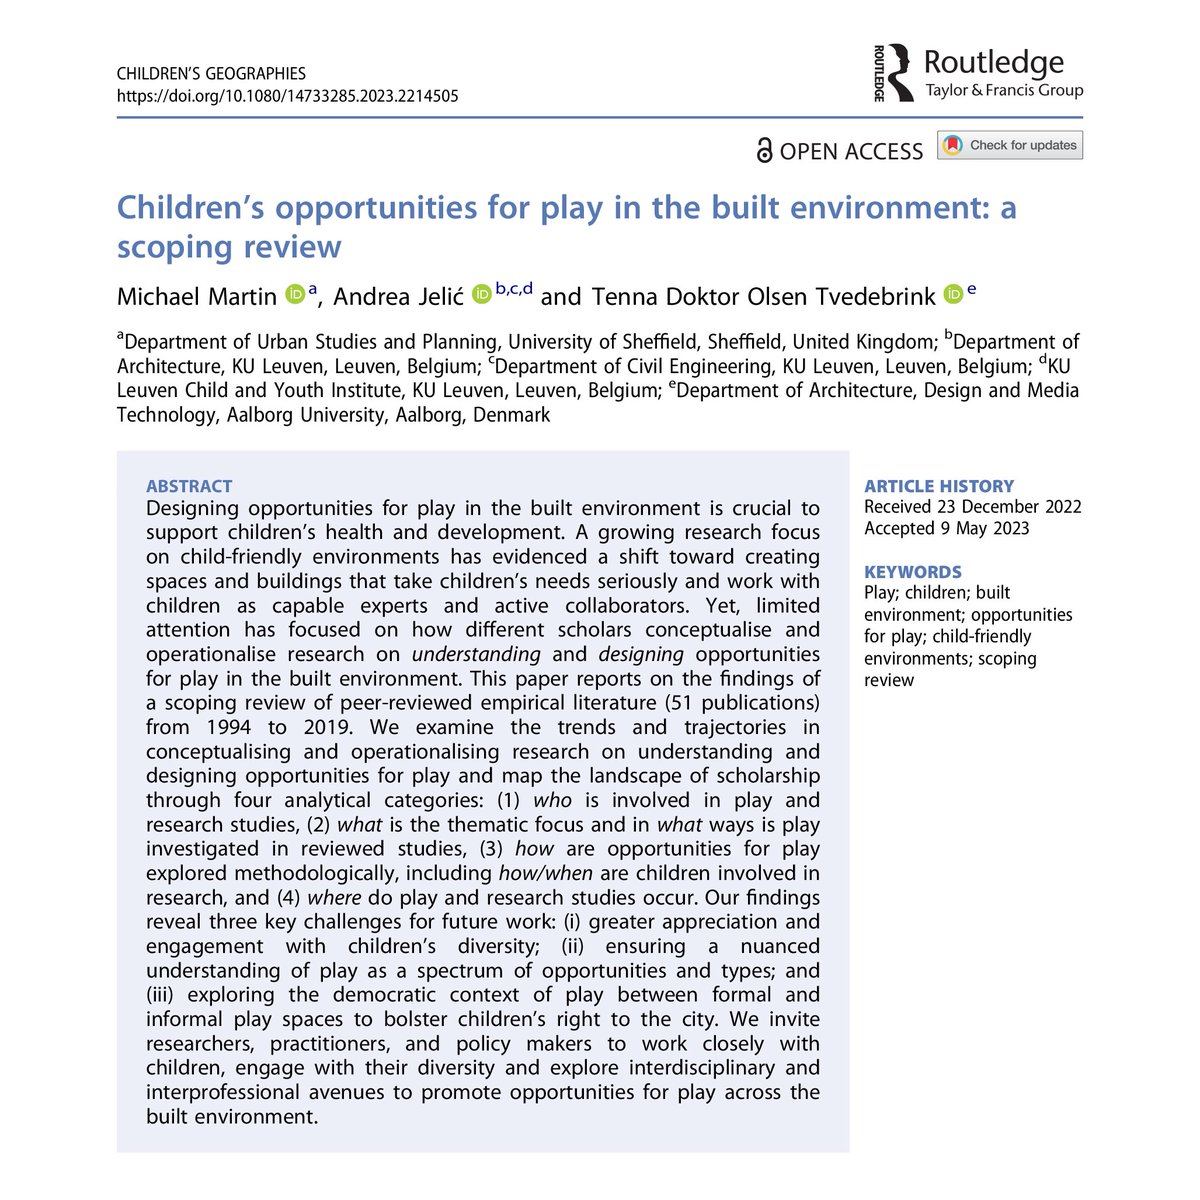 'Children's opportunities for play in the built environment' w. @BrainOnDesign @TennaTvedebrink

OUT NOW+FREE ACCESS in @ChildrensGeogs

How we #design & understand opportunities for #play are crucial to promote resilient #urbanfutures for #children

tandfonline.com/doi/full/10.10…

1/3